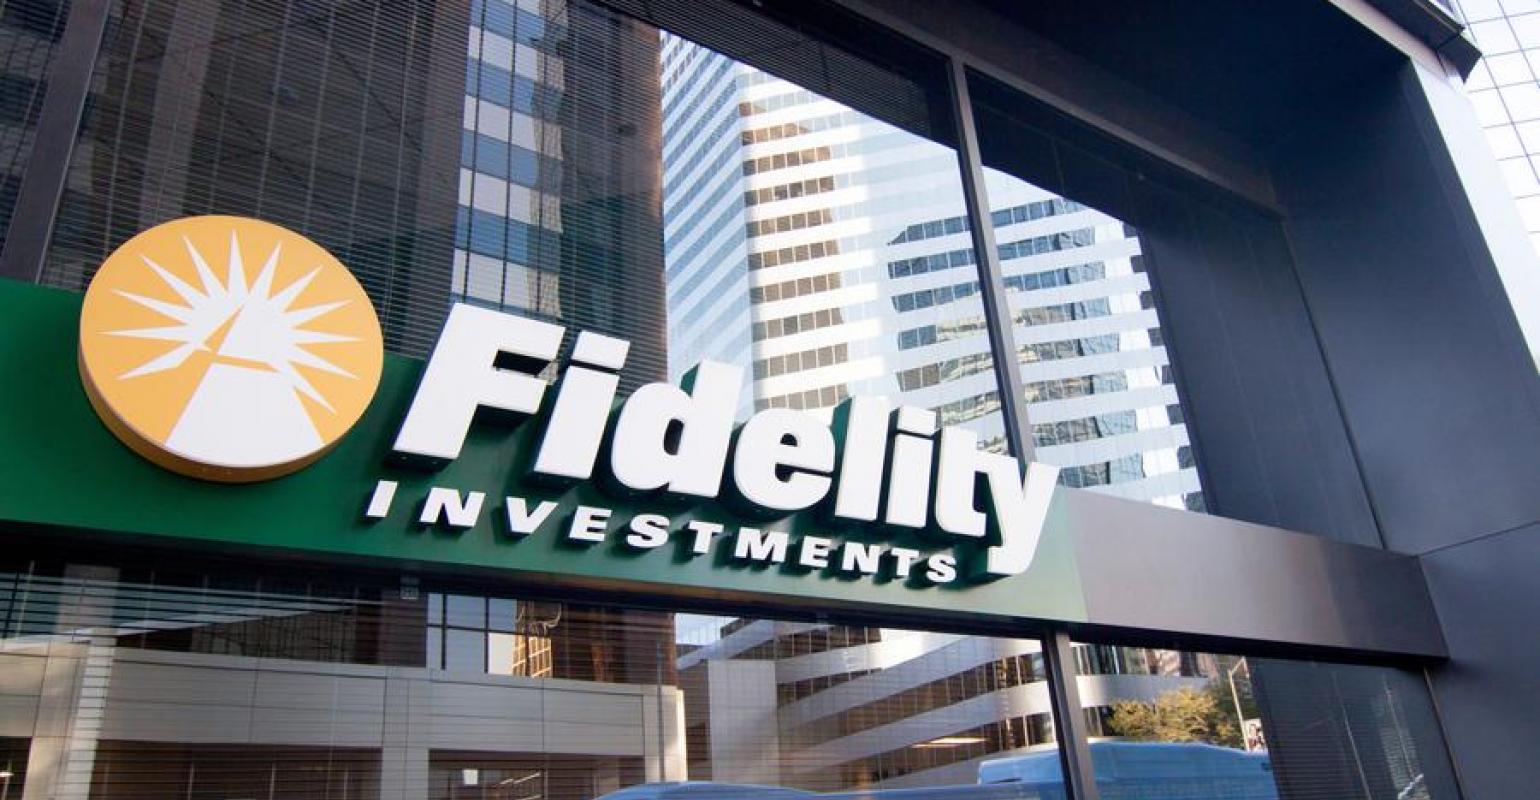 Introduction to Fidelity Investments: A Leader in Financial Services